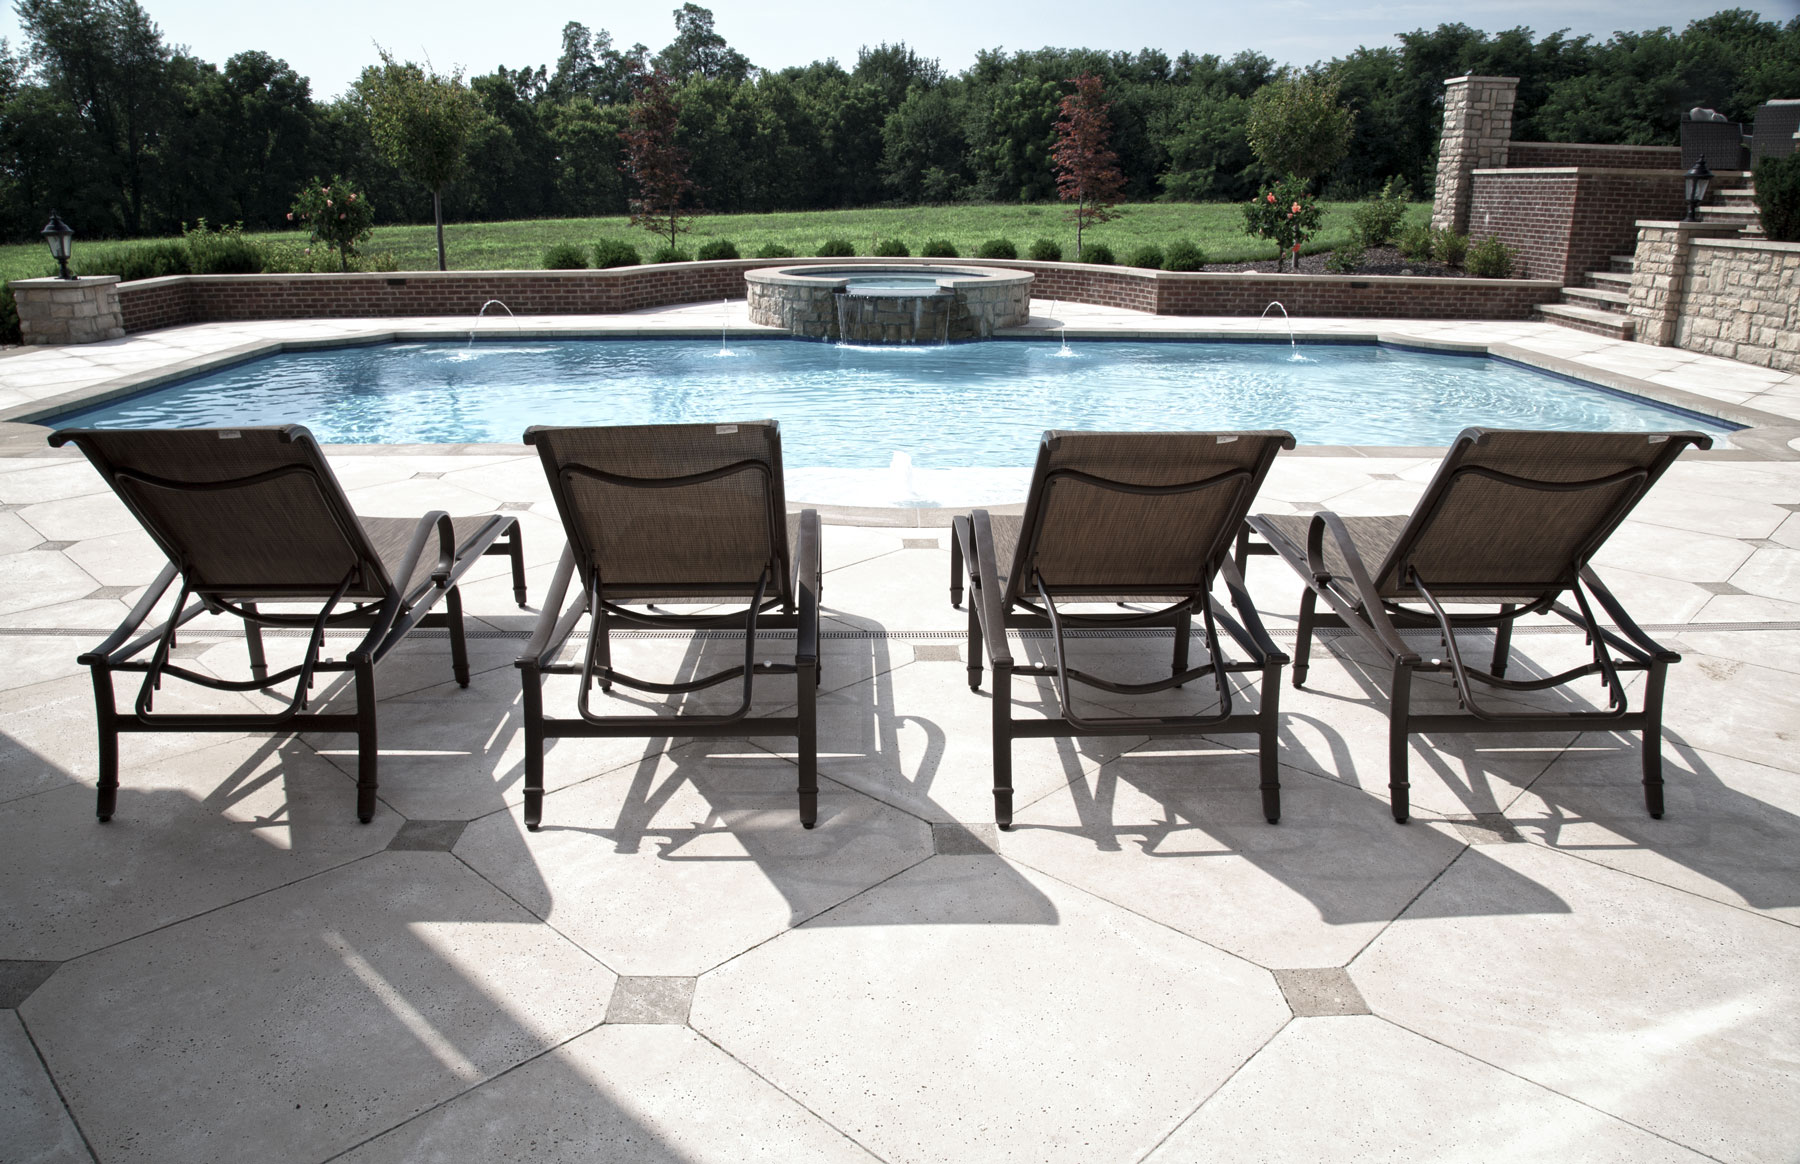 The rectangle pavers by Rushing Design mesh into the pool pavers